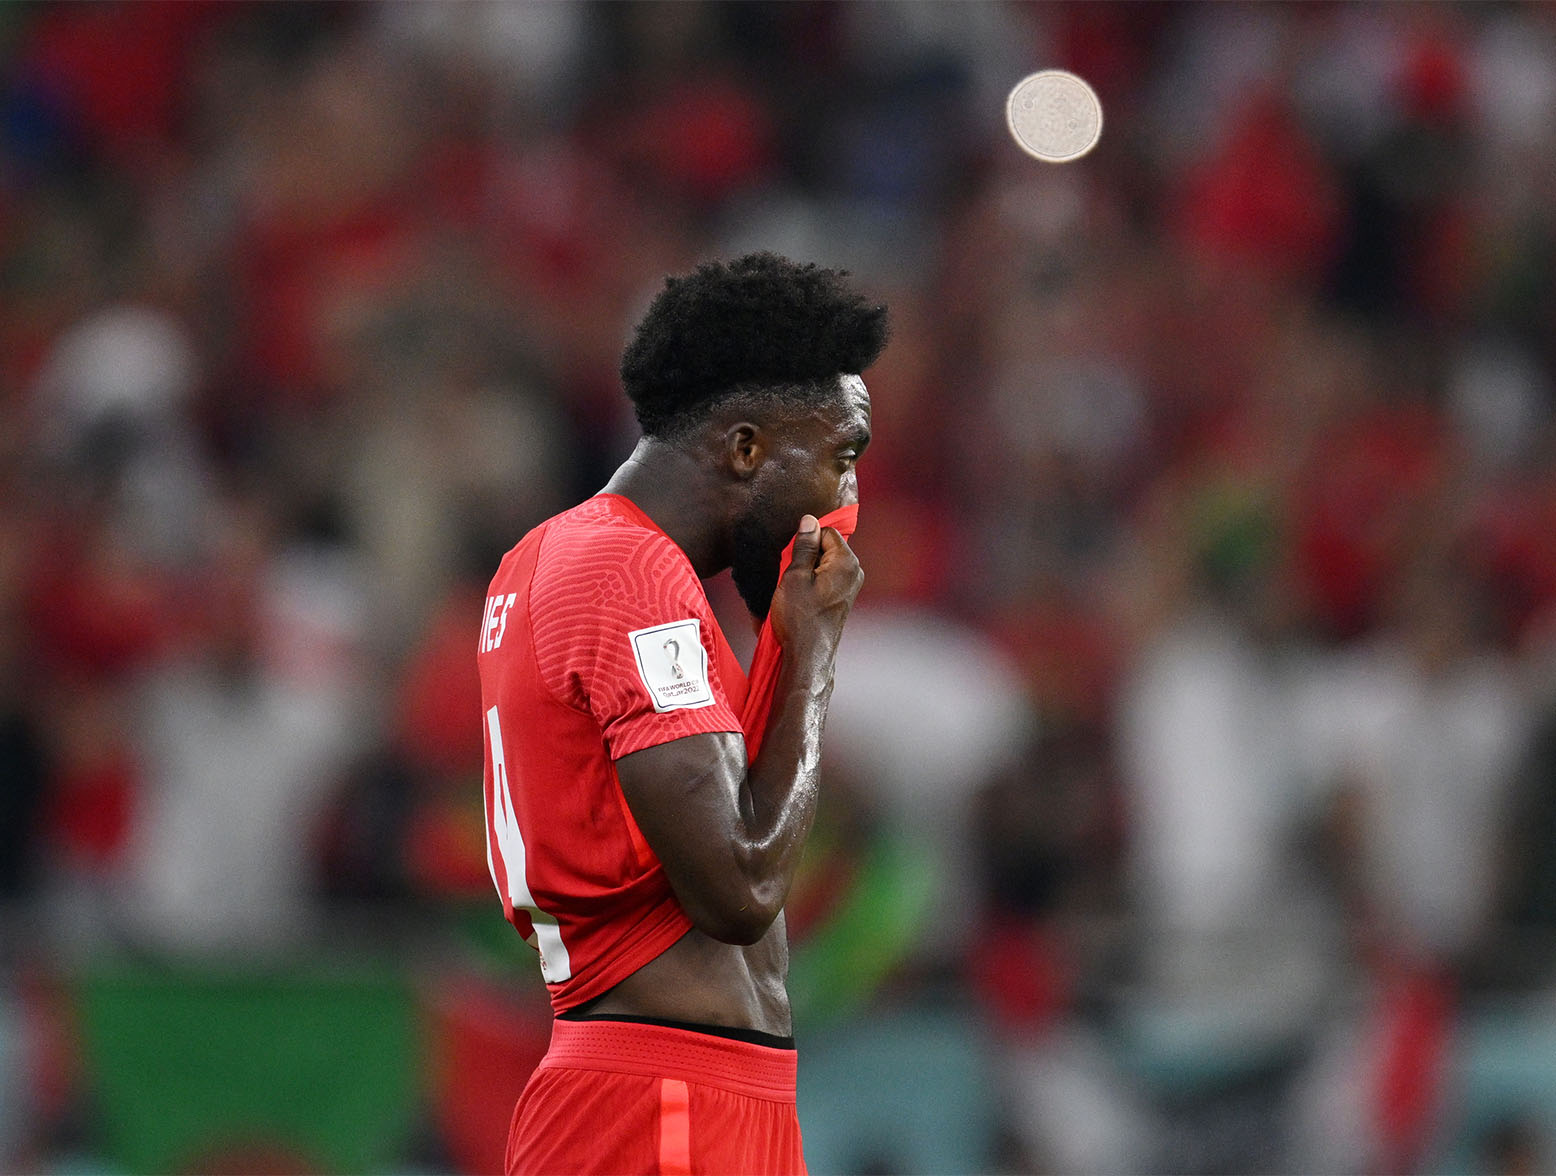 DOHA, QATAR - DECEMBER 01: Mark-Anthony Kaye of Canada shows dejection after the 1-2 victory in the FIFA World Cup Qatar 2022 Group F match between Canada and Morocco at Al Thumama Stadium on December 01, 2022 in Doha, Qatar. (Photo by Matthias Hangst/Getty Images)